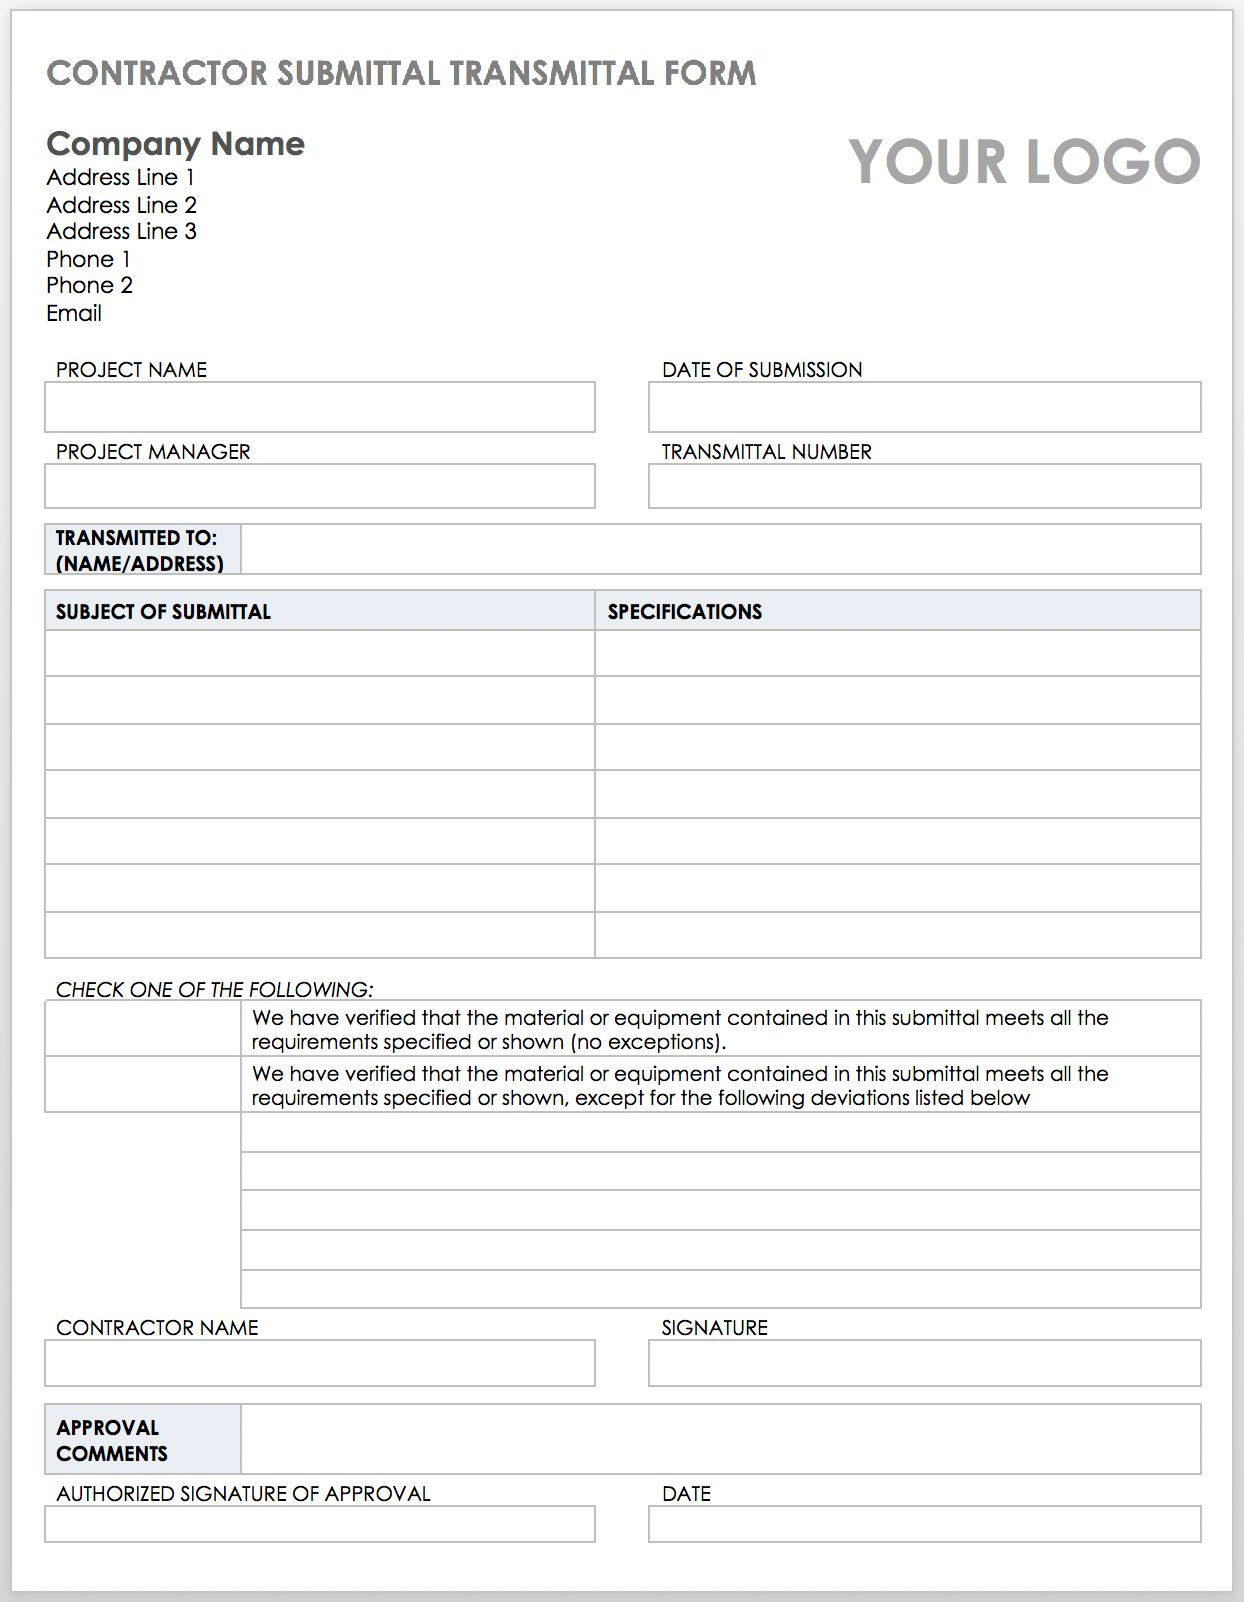 Contractor Submittal Transmittal Form template